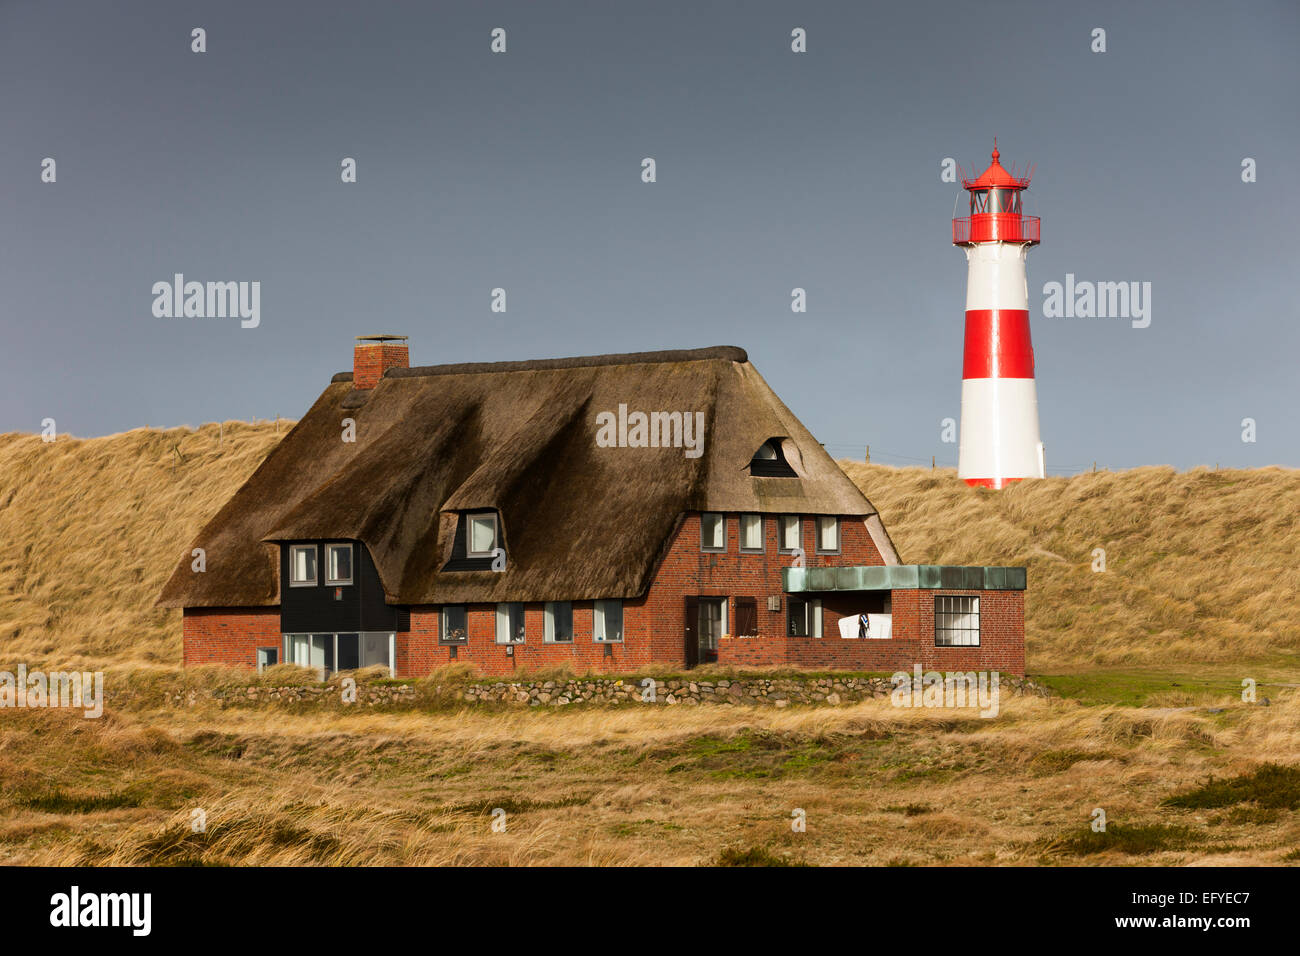 The red and white lighthouse of List Ost and a thatched house on the Ellenbogen peninsula, List, Sylt, North Frisia Stock Photo